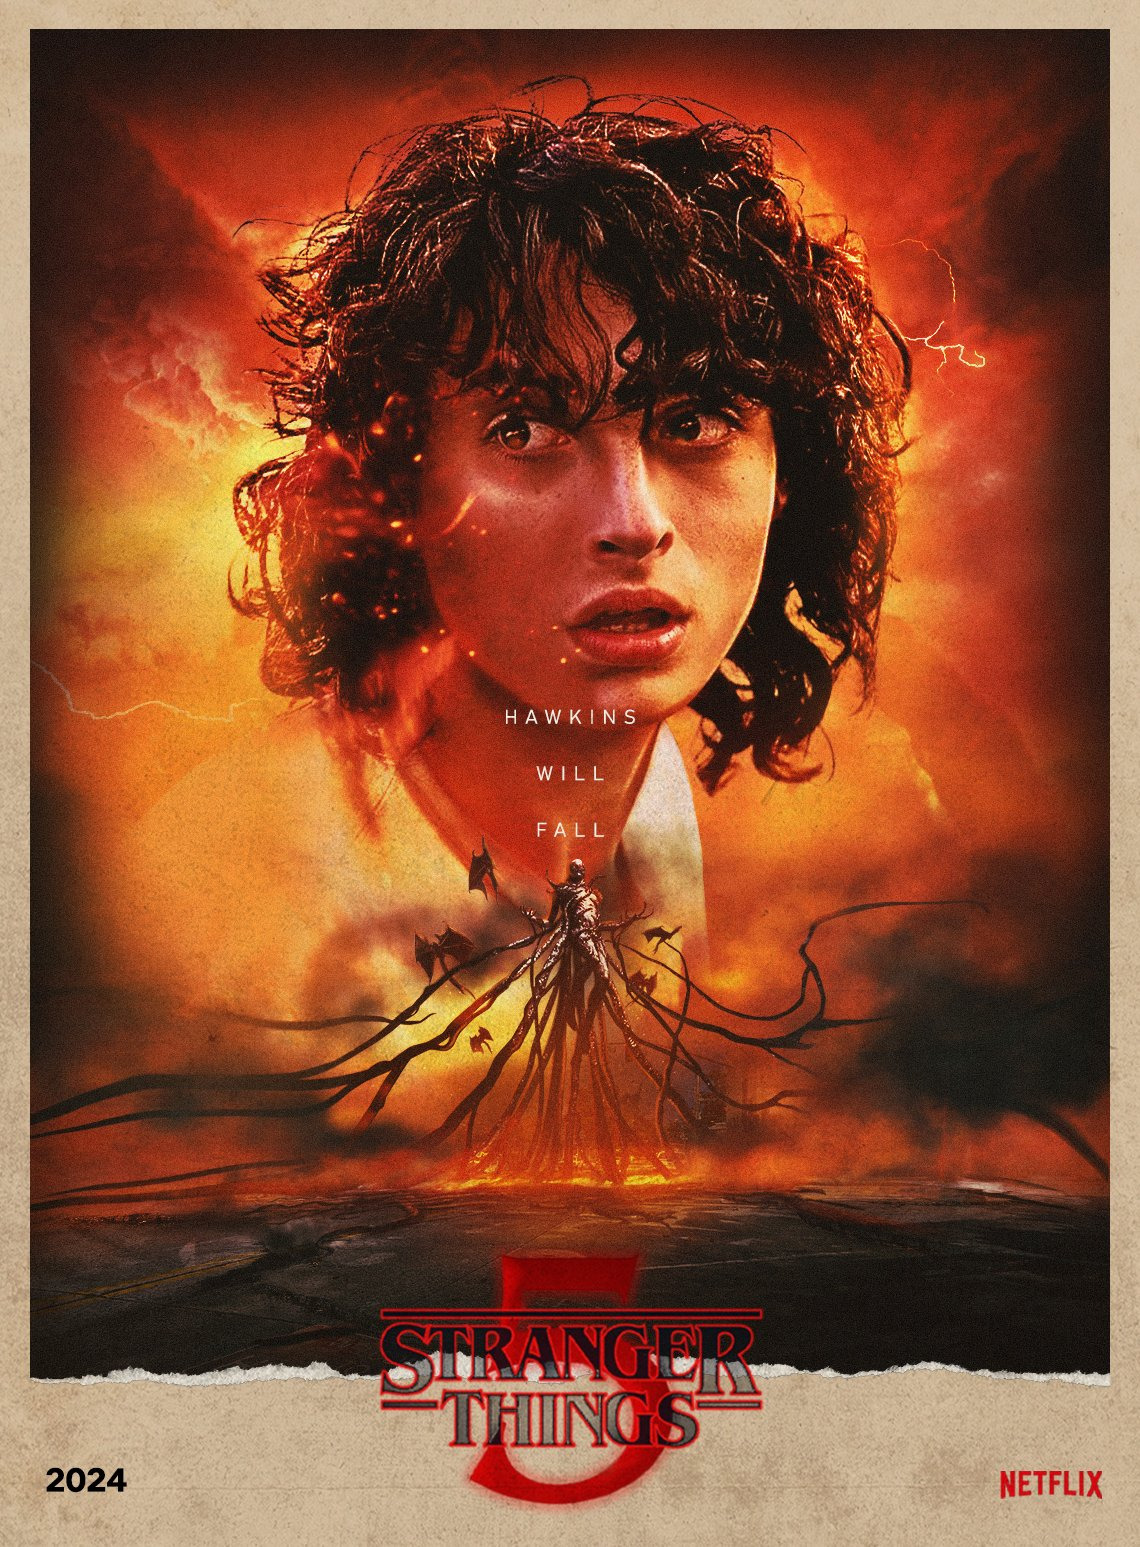 almirondesign — STRANGER THINGS 5 FANART POSTER Crazy Together